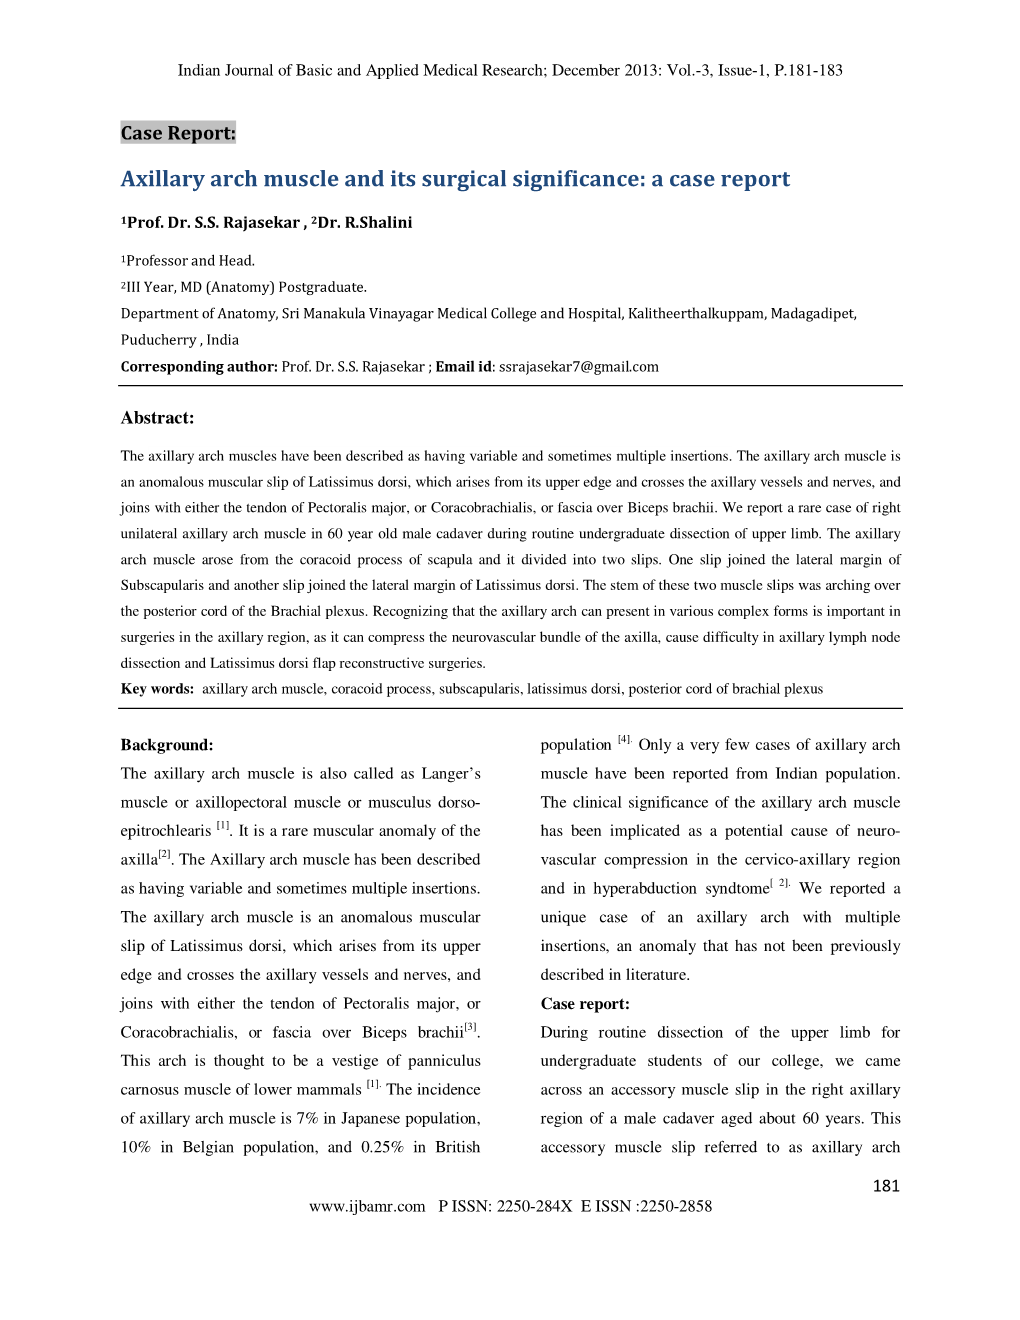 Axillary Arch Muscle and Its Surgical Significance: a Case Report